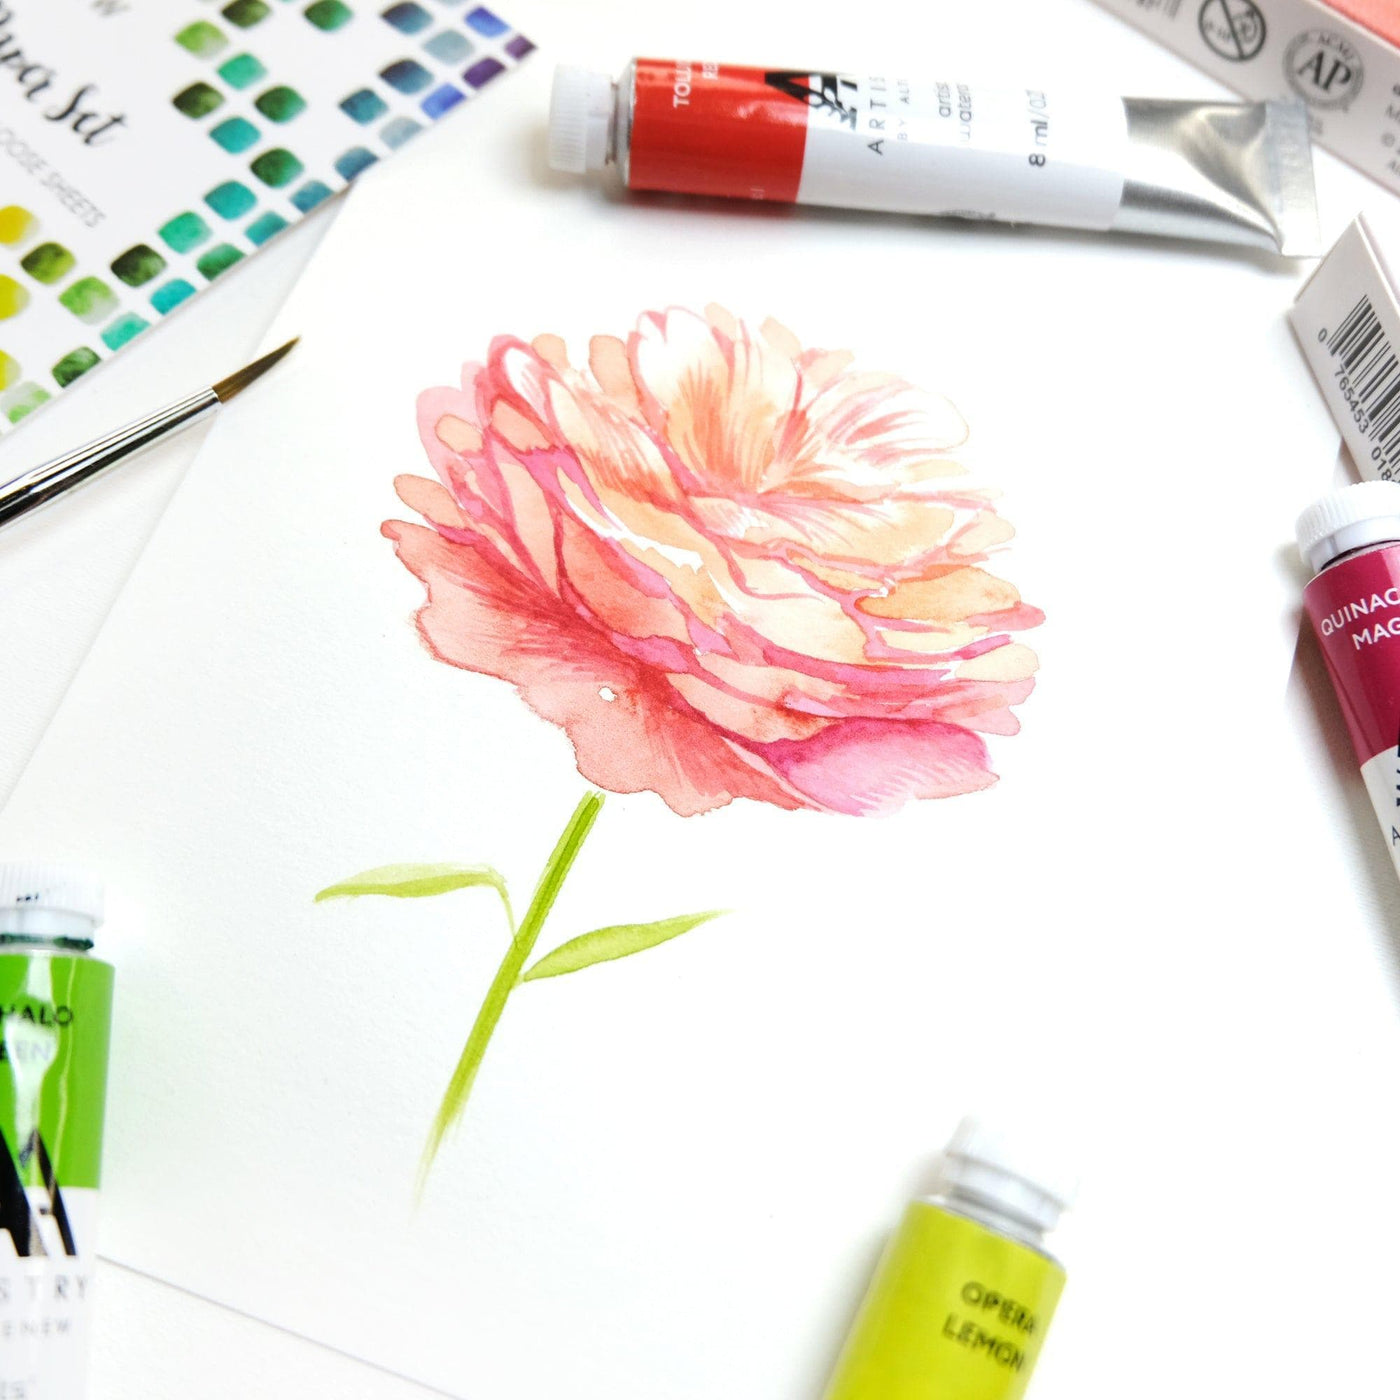 The Artist in You: Painting 101 With Watercolor Tubes